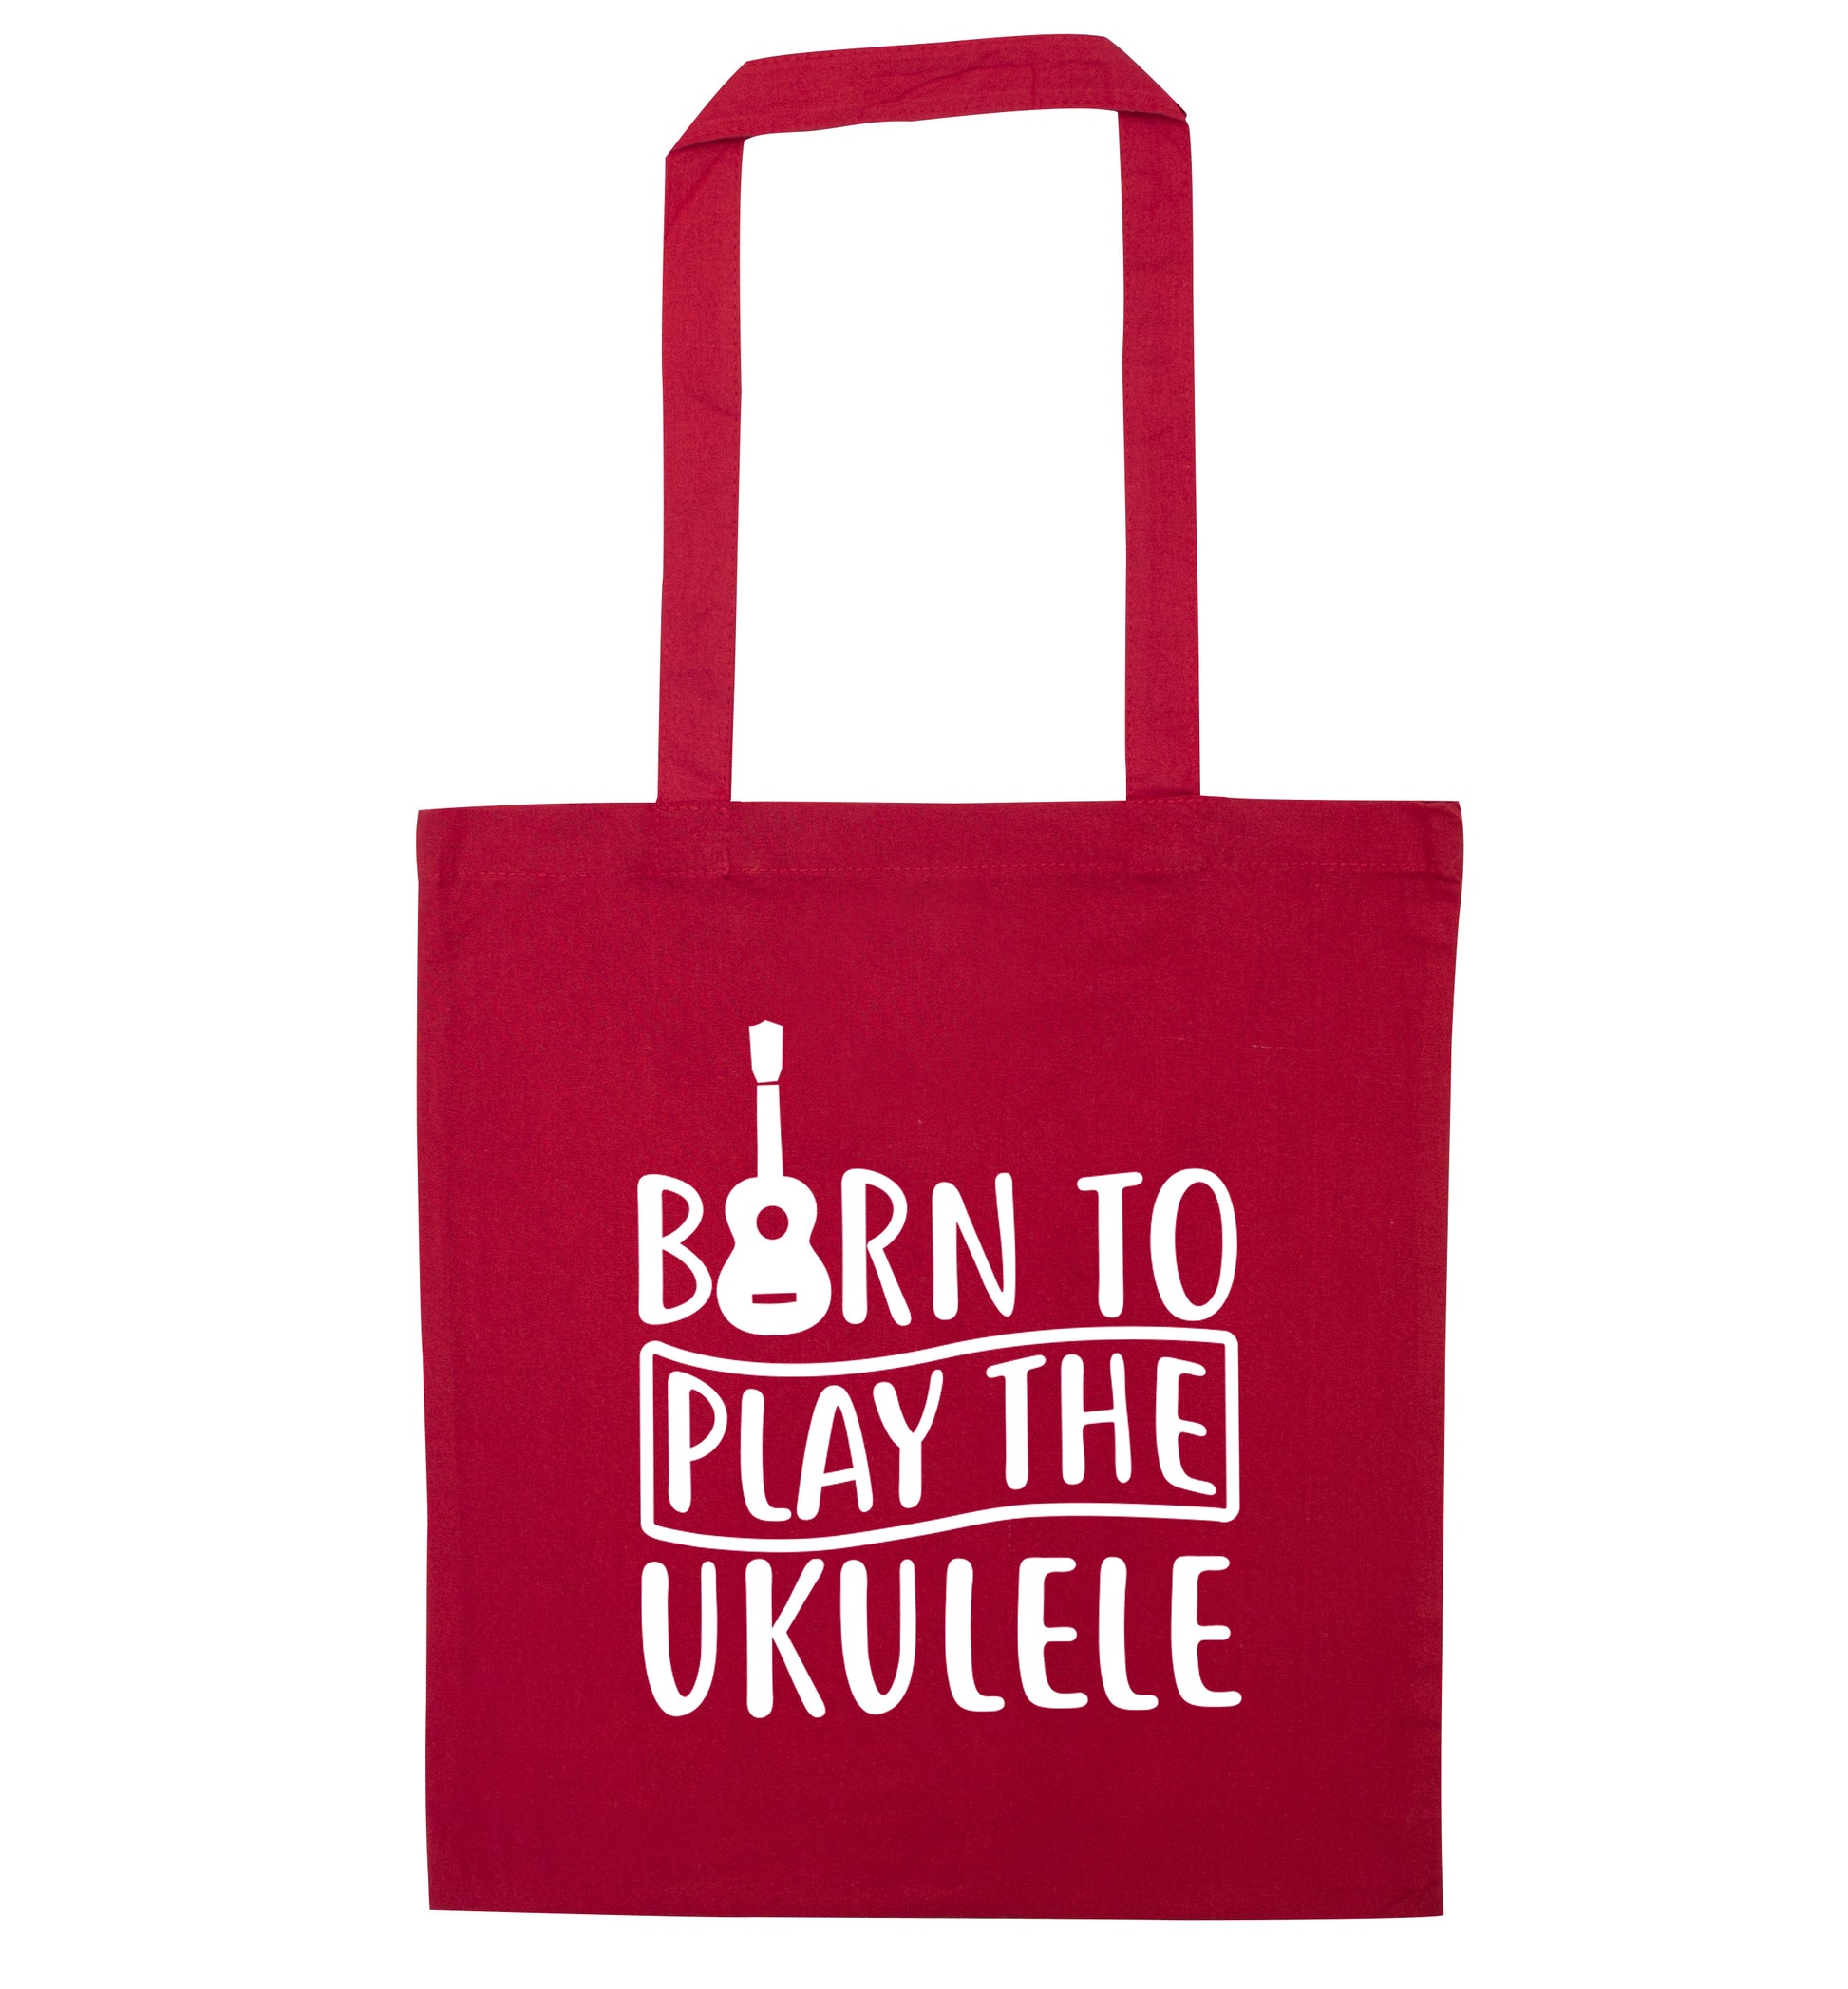 Born to play the ukulele red tote bag